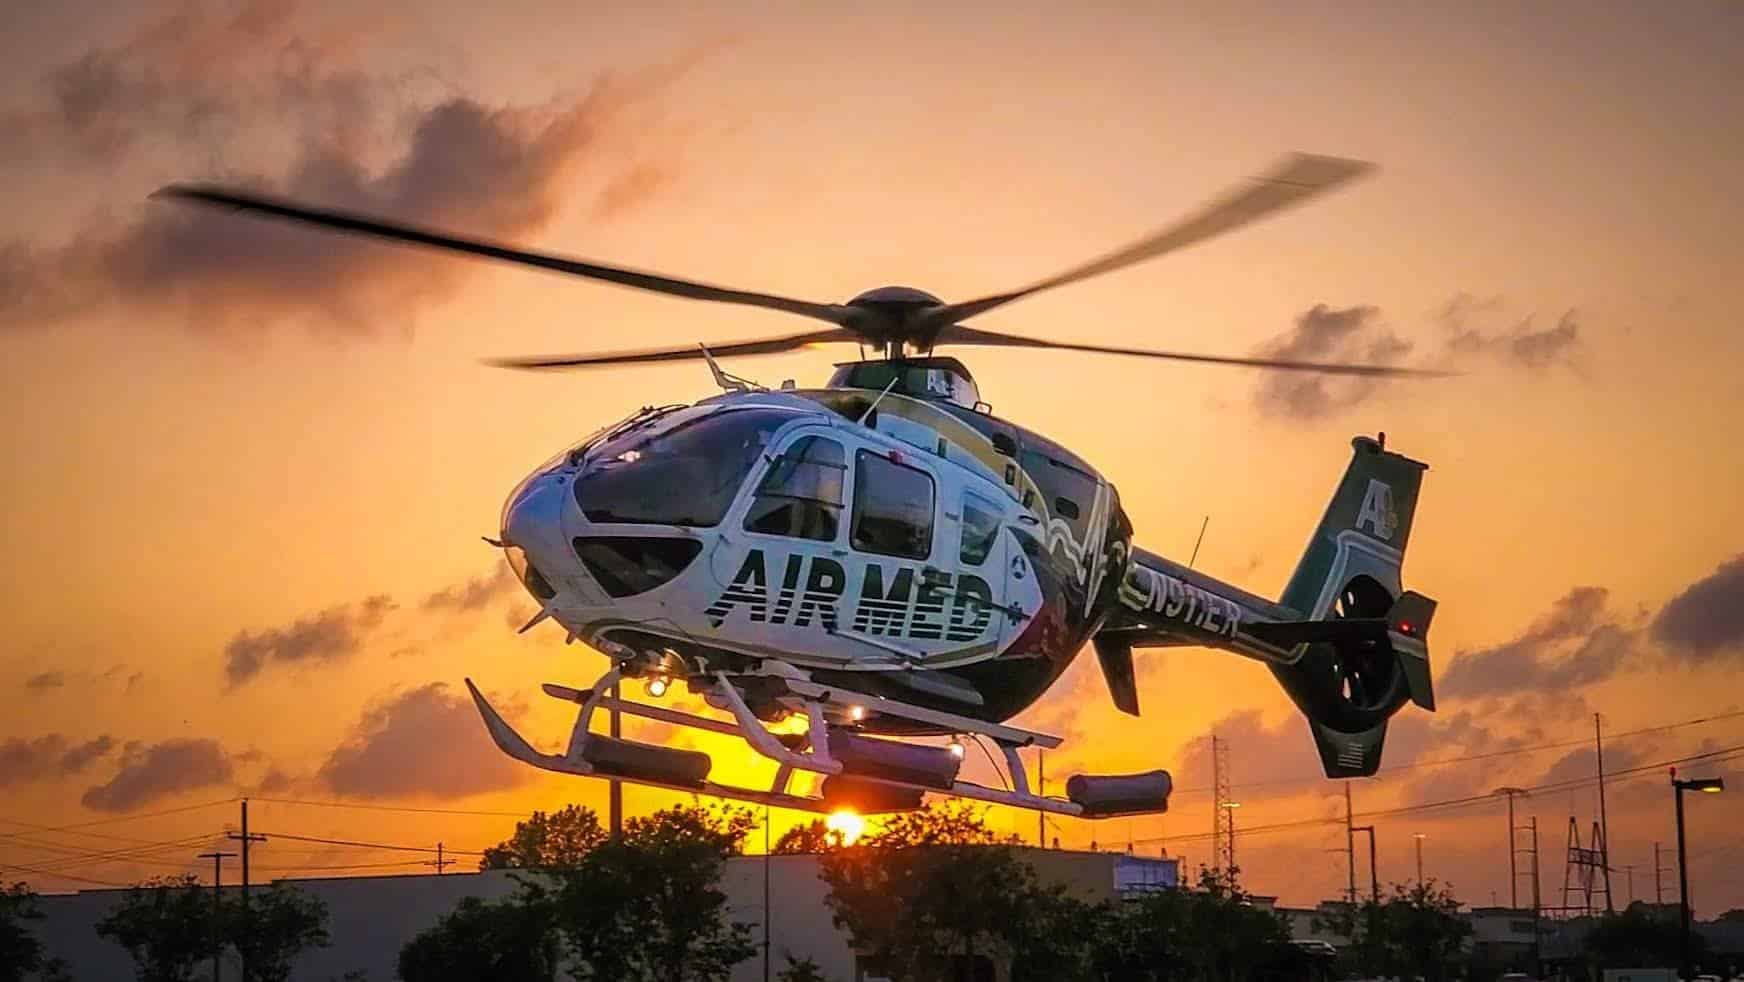 air med services